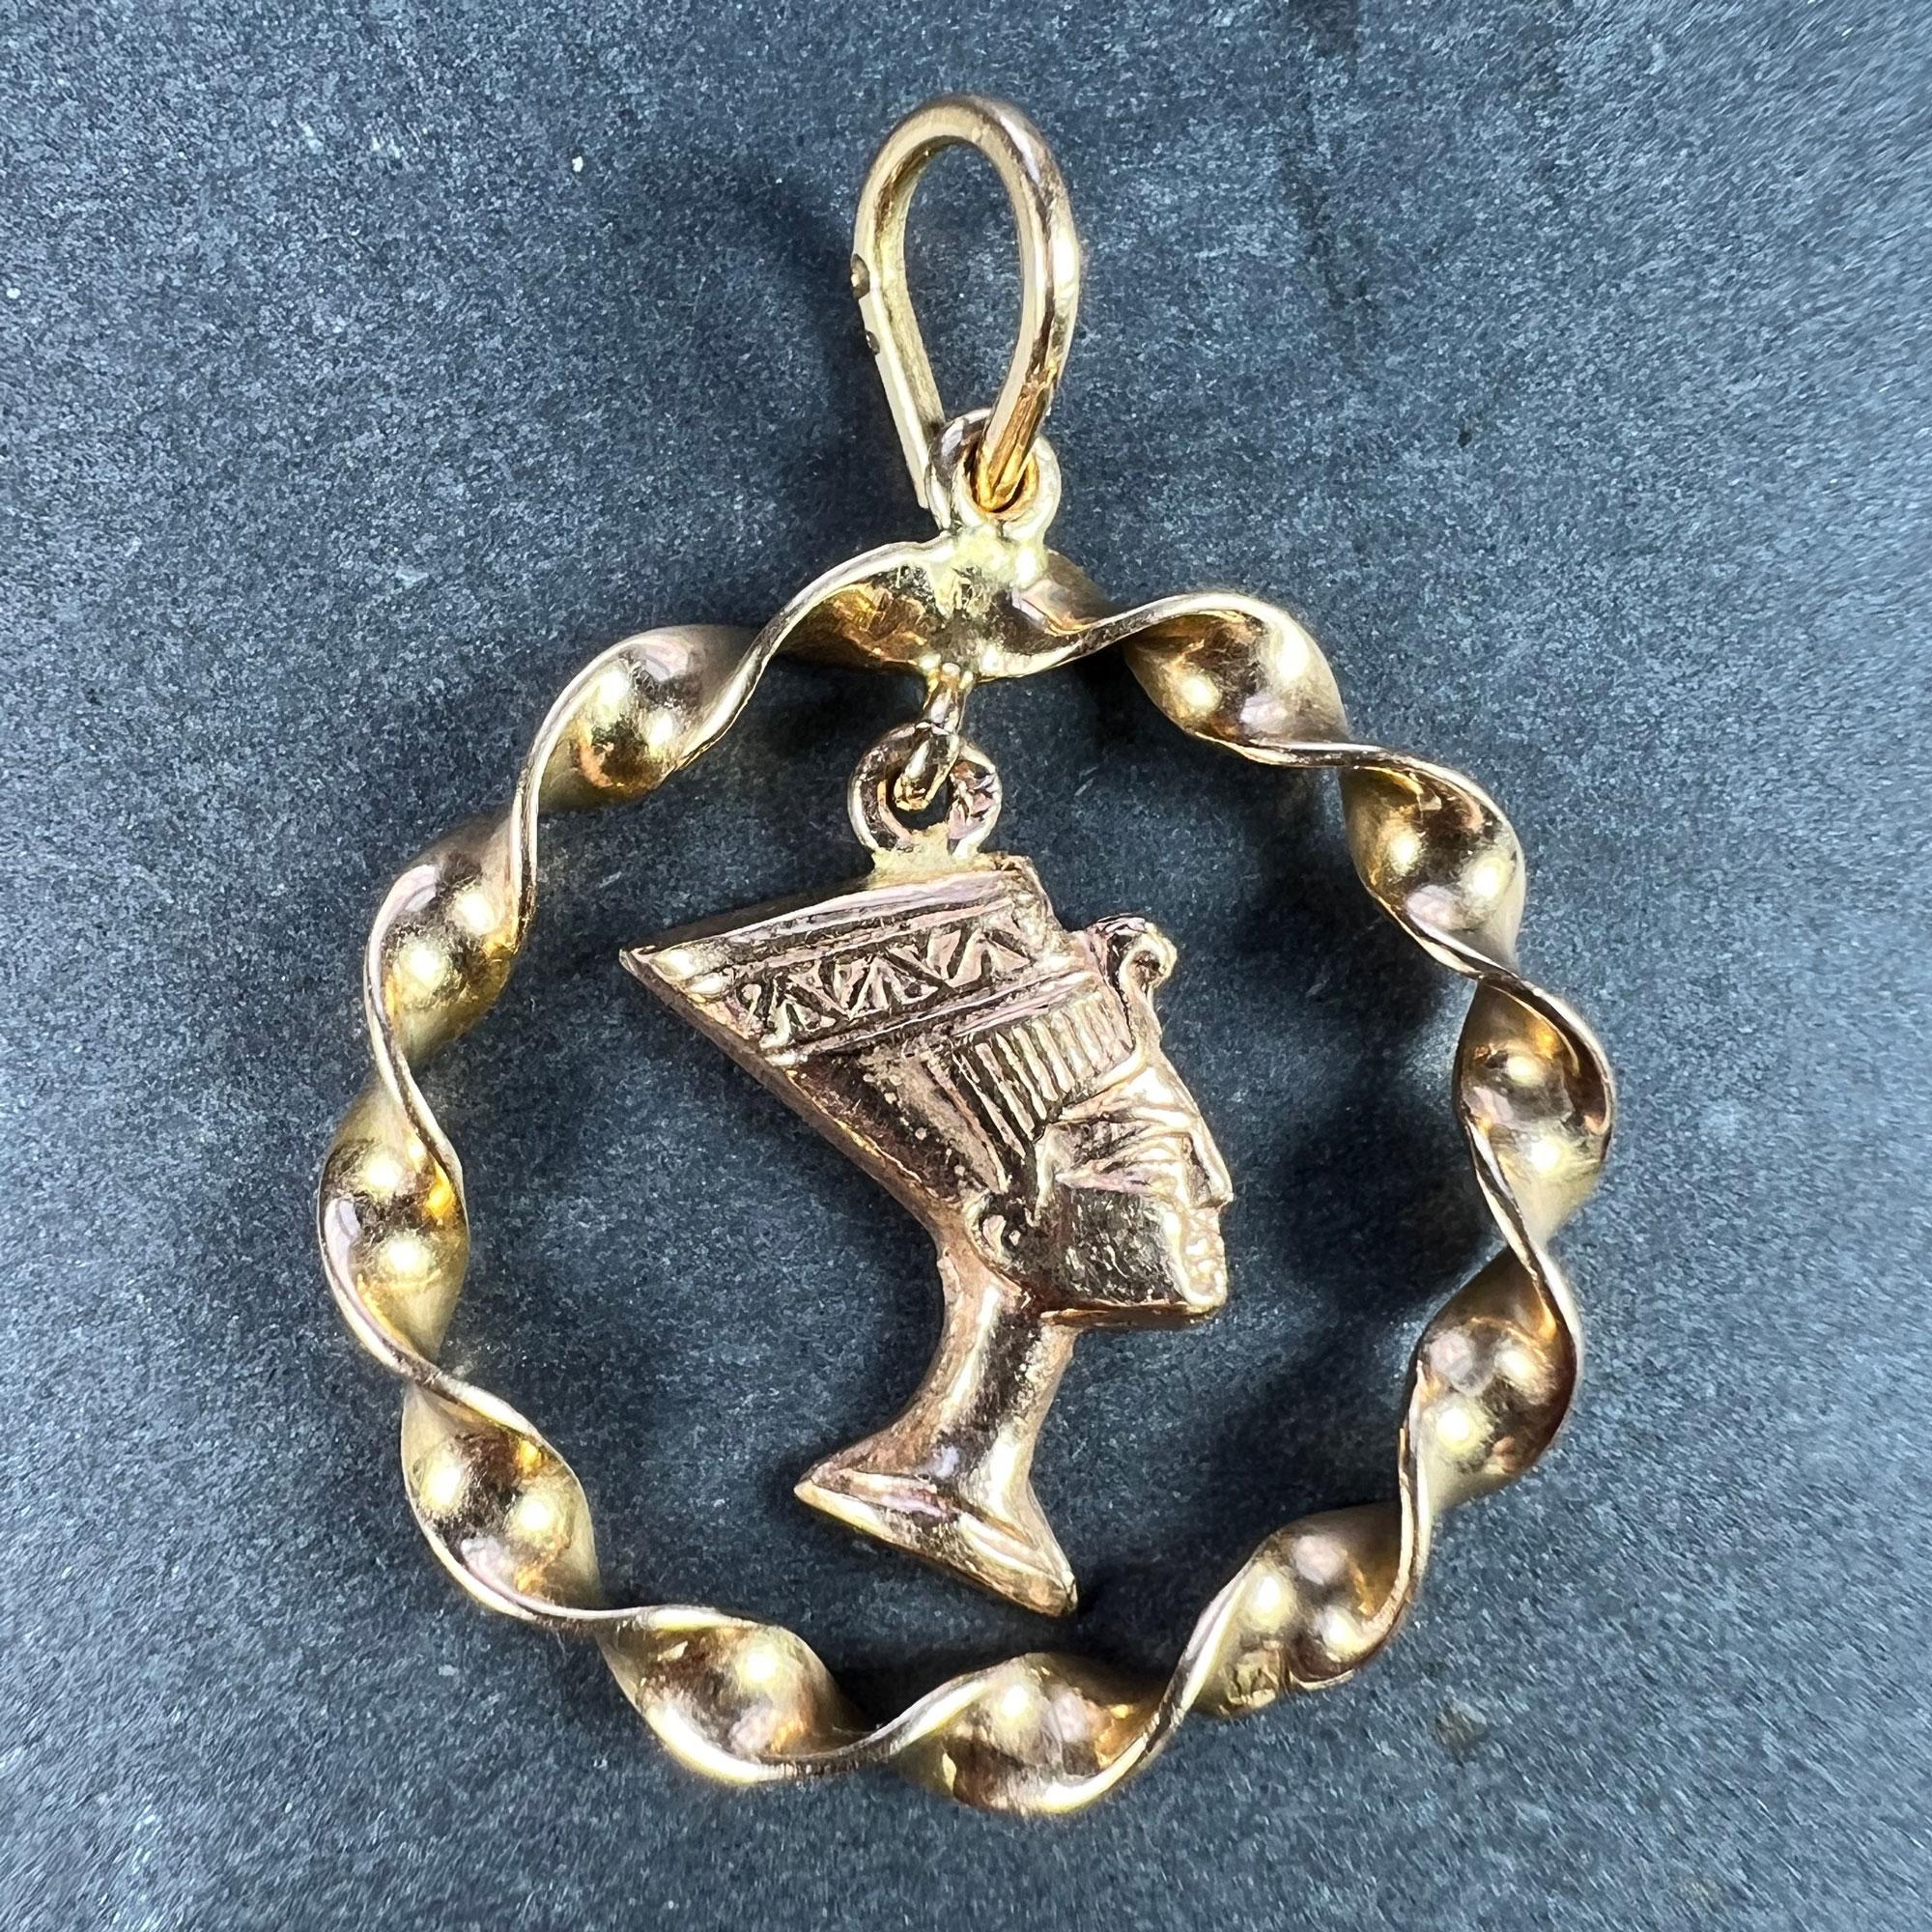 An Egyptian 18 karat (18K) yellow gold charm pendant designed as a bust of the head of Queen Nefertiti within a twisted gold circle. Stamped with the Egyptian mark for 18 karat gold.

Dimensions: 2.7 x 2.4 x 0.3 cm (not including jump ring)
Weight: